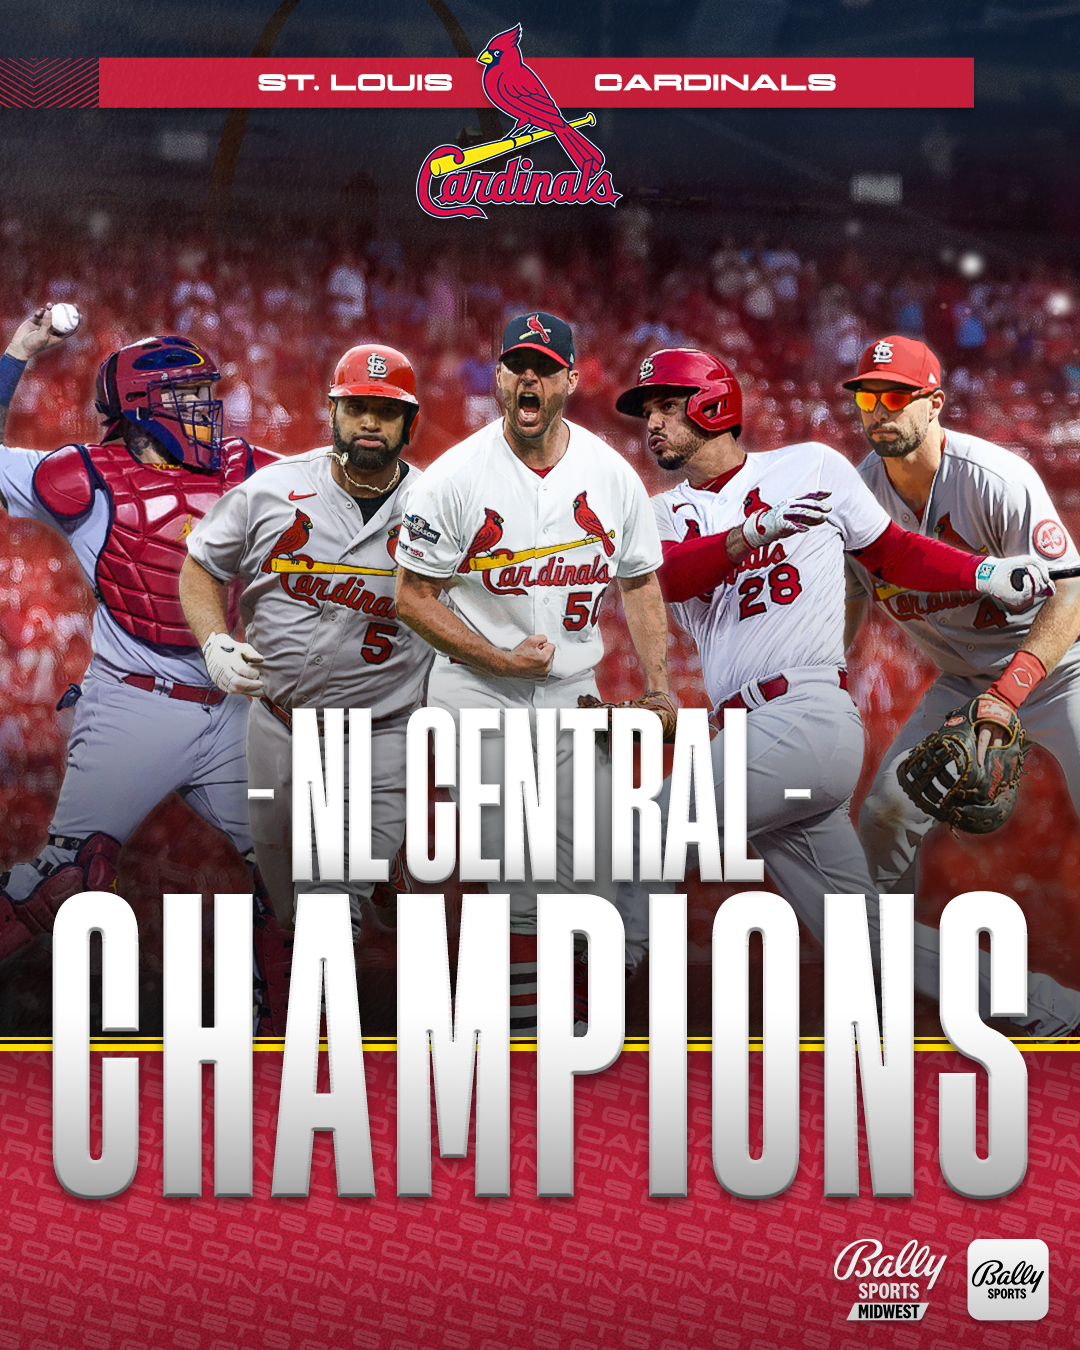 STL Sports Central on X: One year ago today, the #STLCards